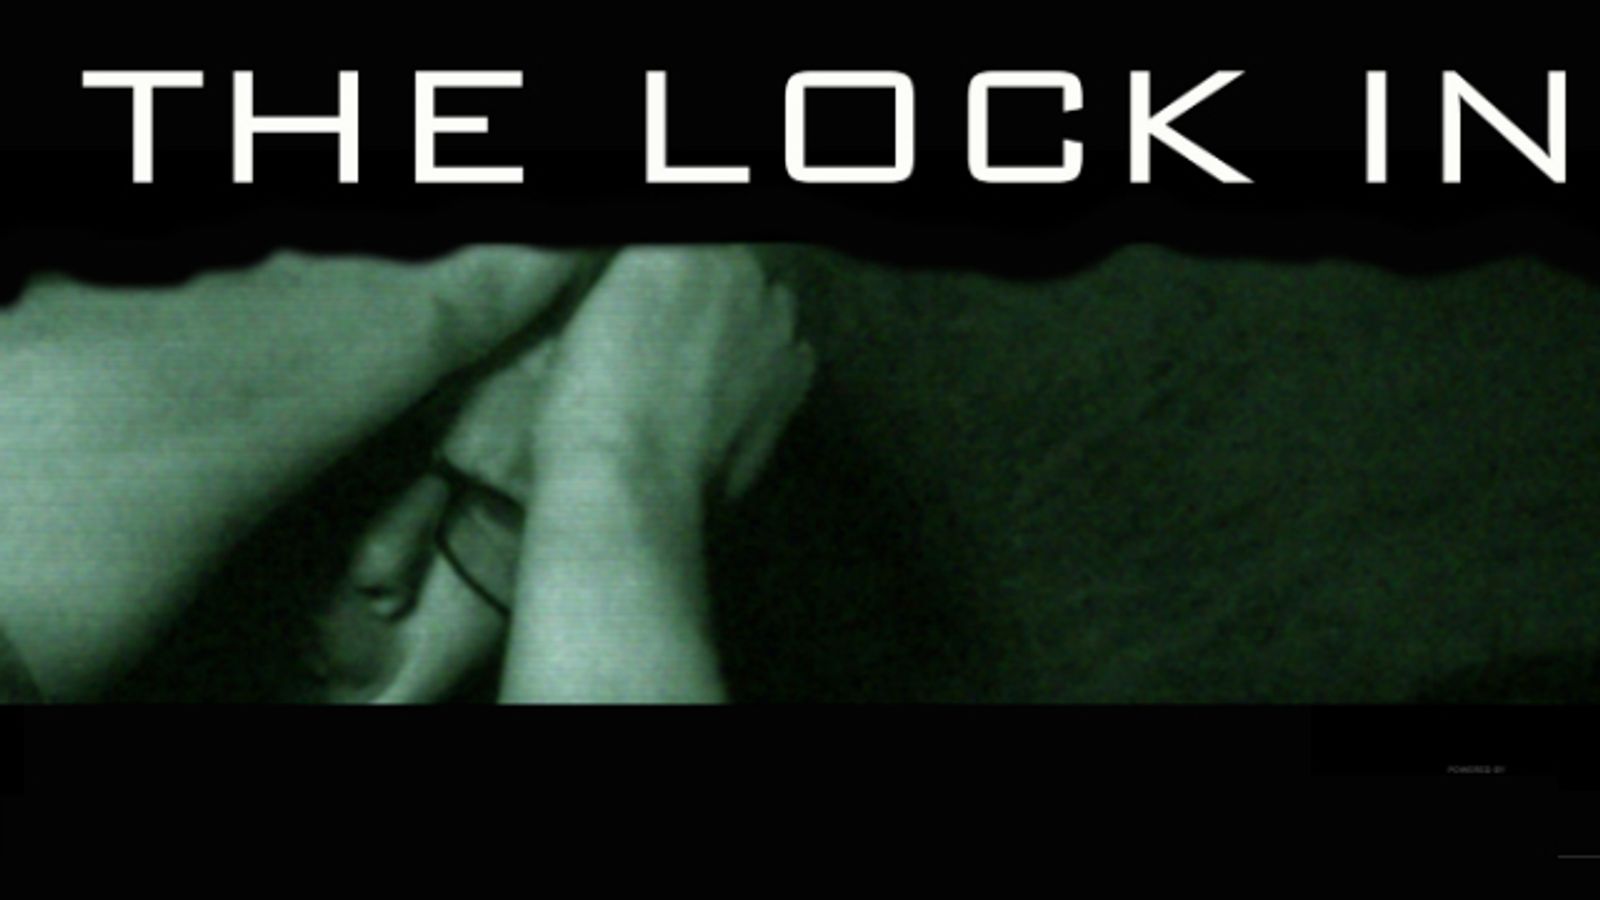 'The Lock In': Is This How Modern Fundamentalists View Porn?